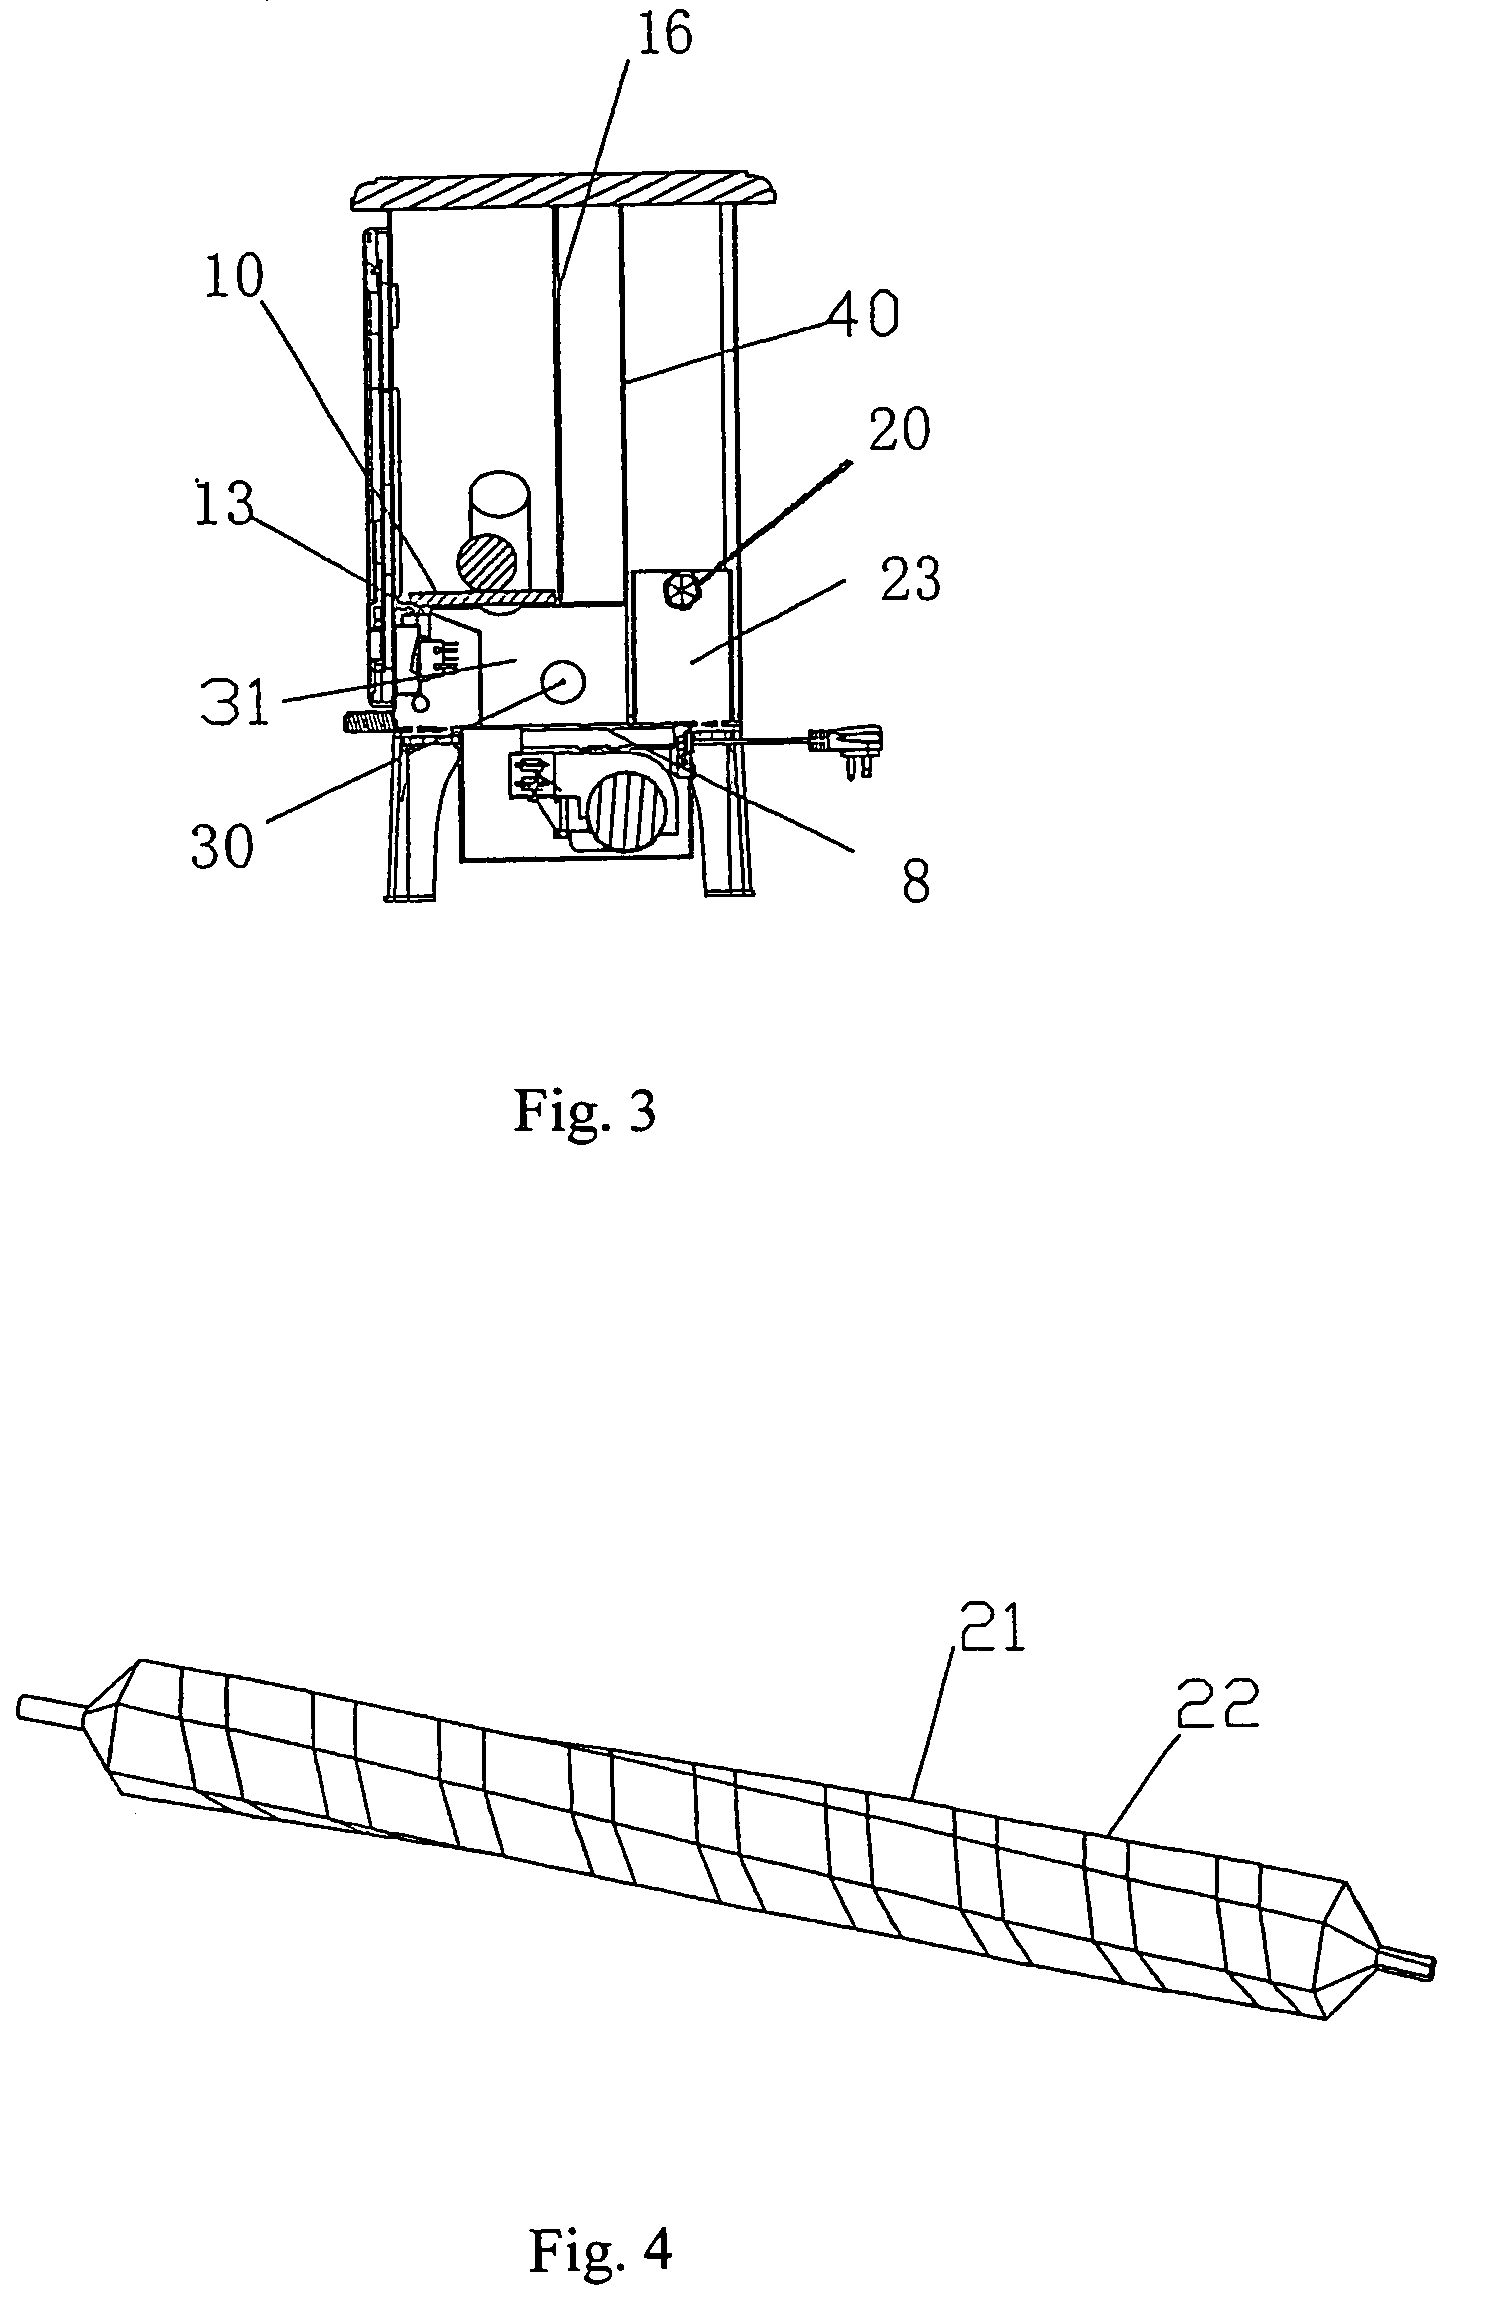 Flame imitation device for wall mounted heater